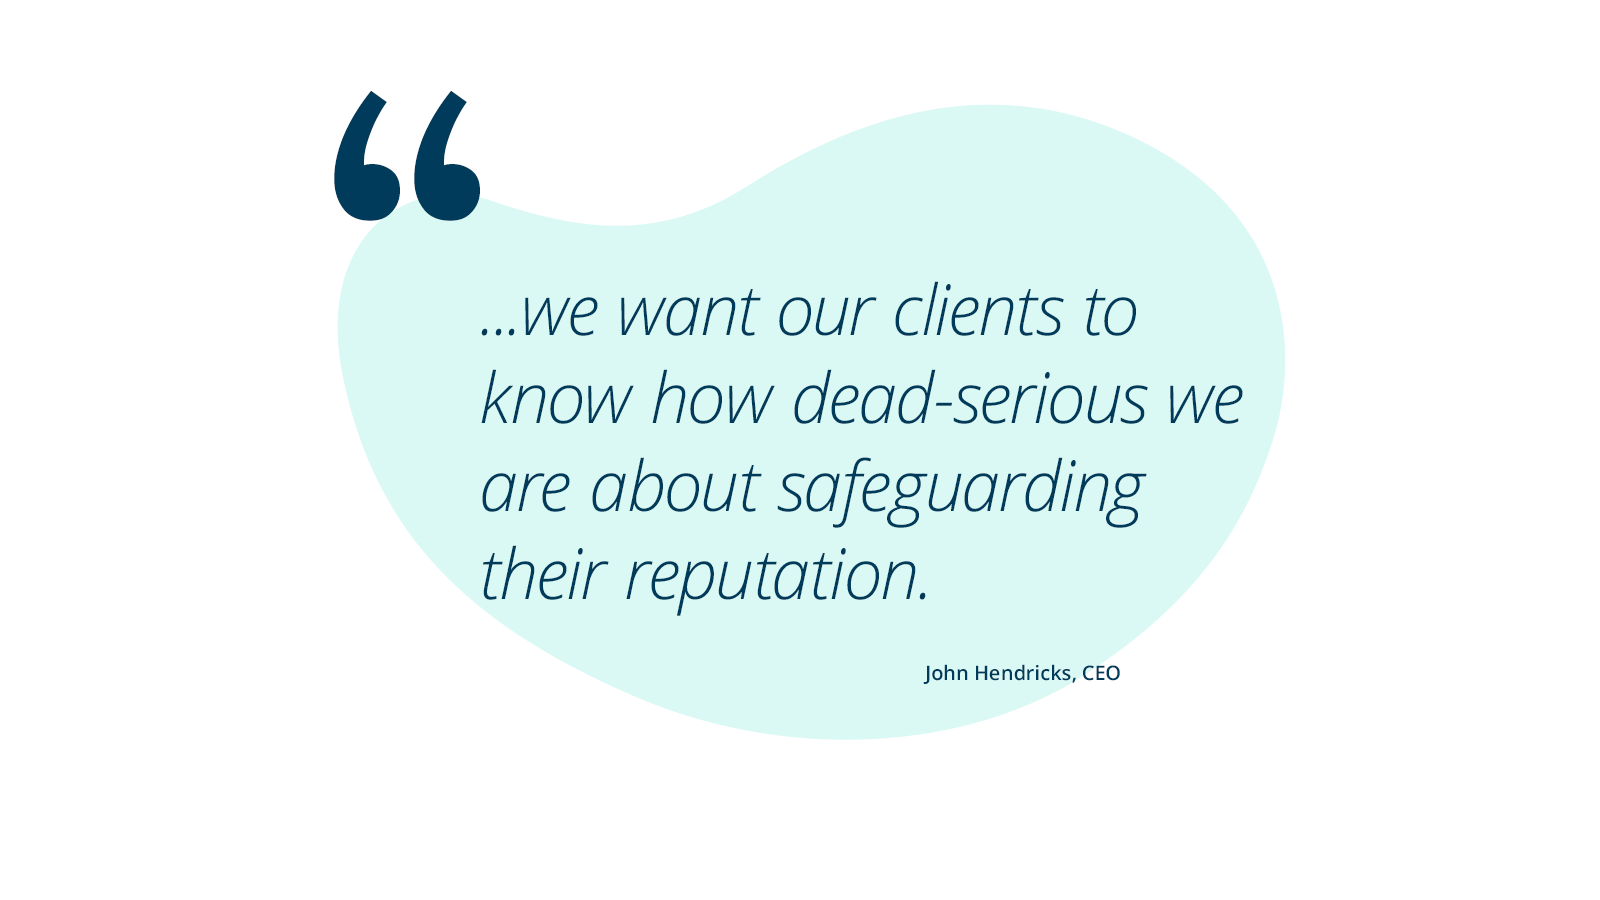 we
          want our clients to know how dead-serious we are about safeguarding
          their reputation